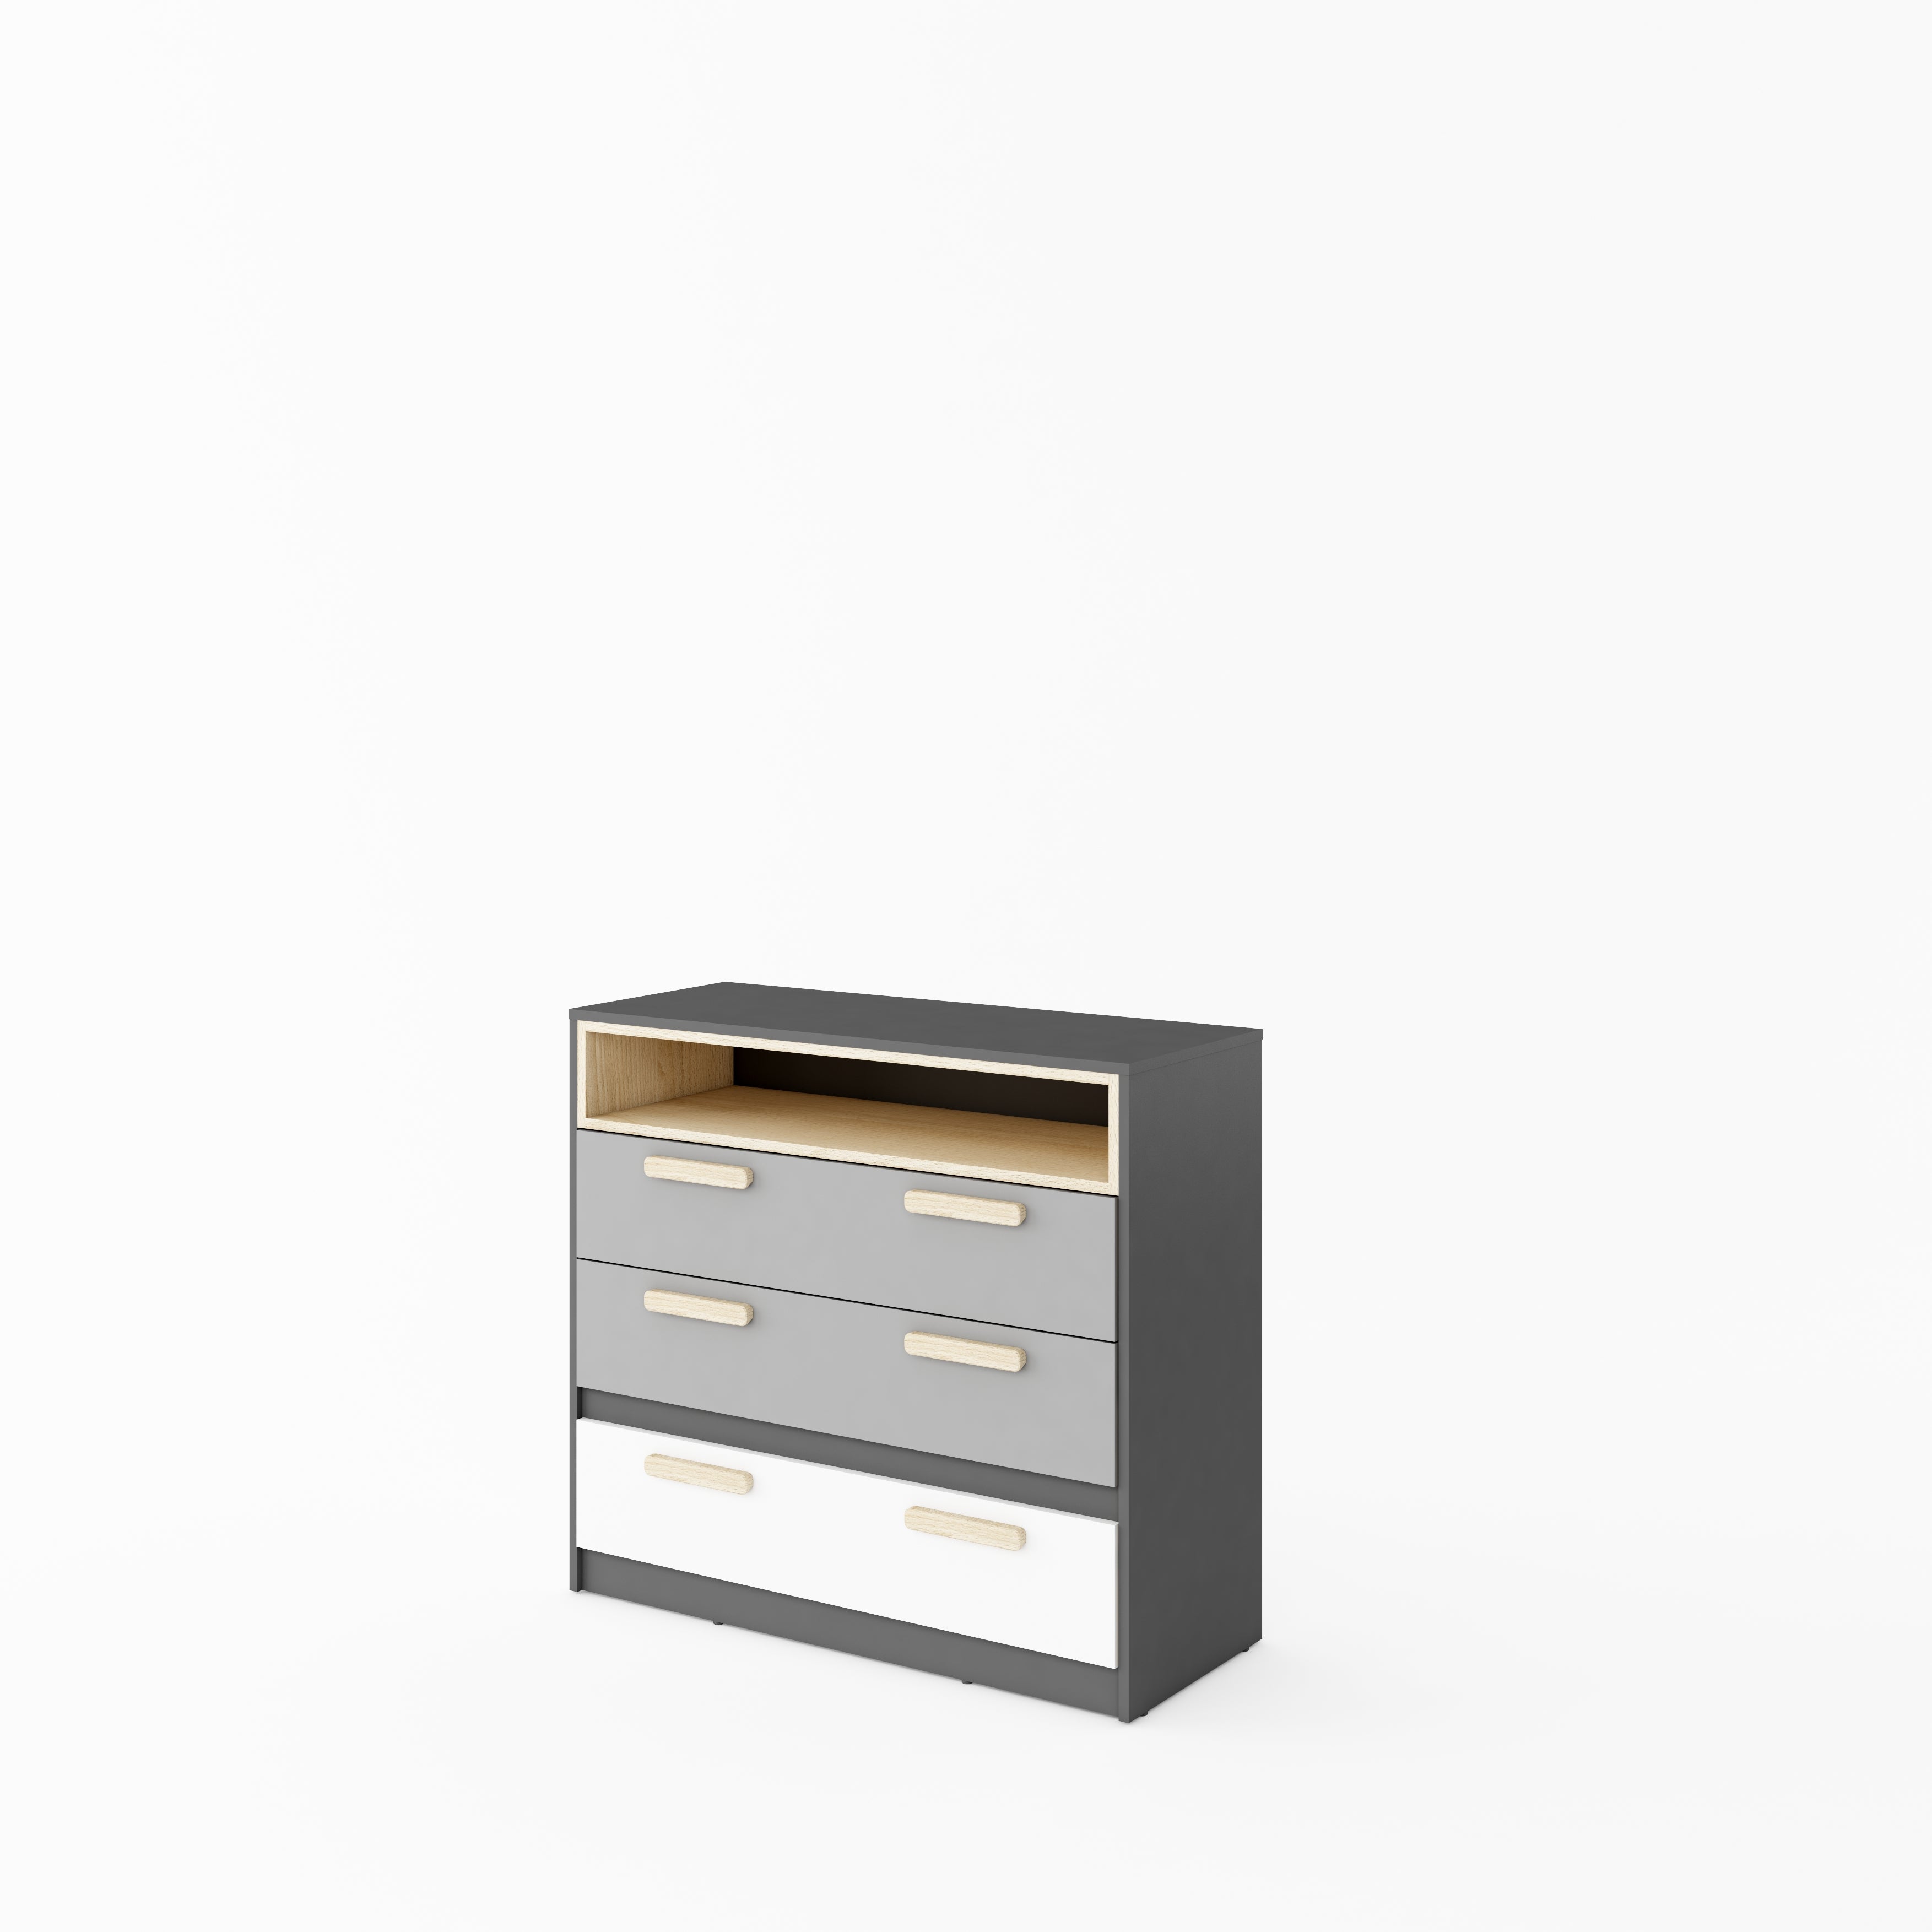 View Pok PO08 Chest of Drawers information